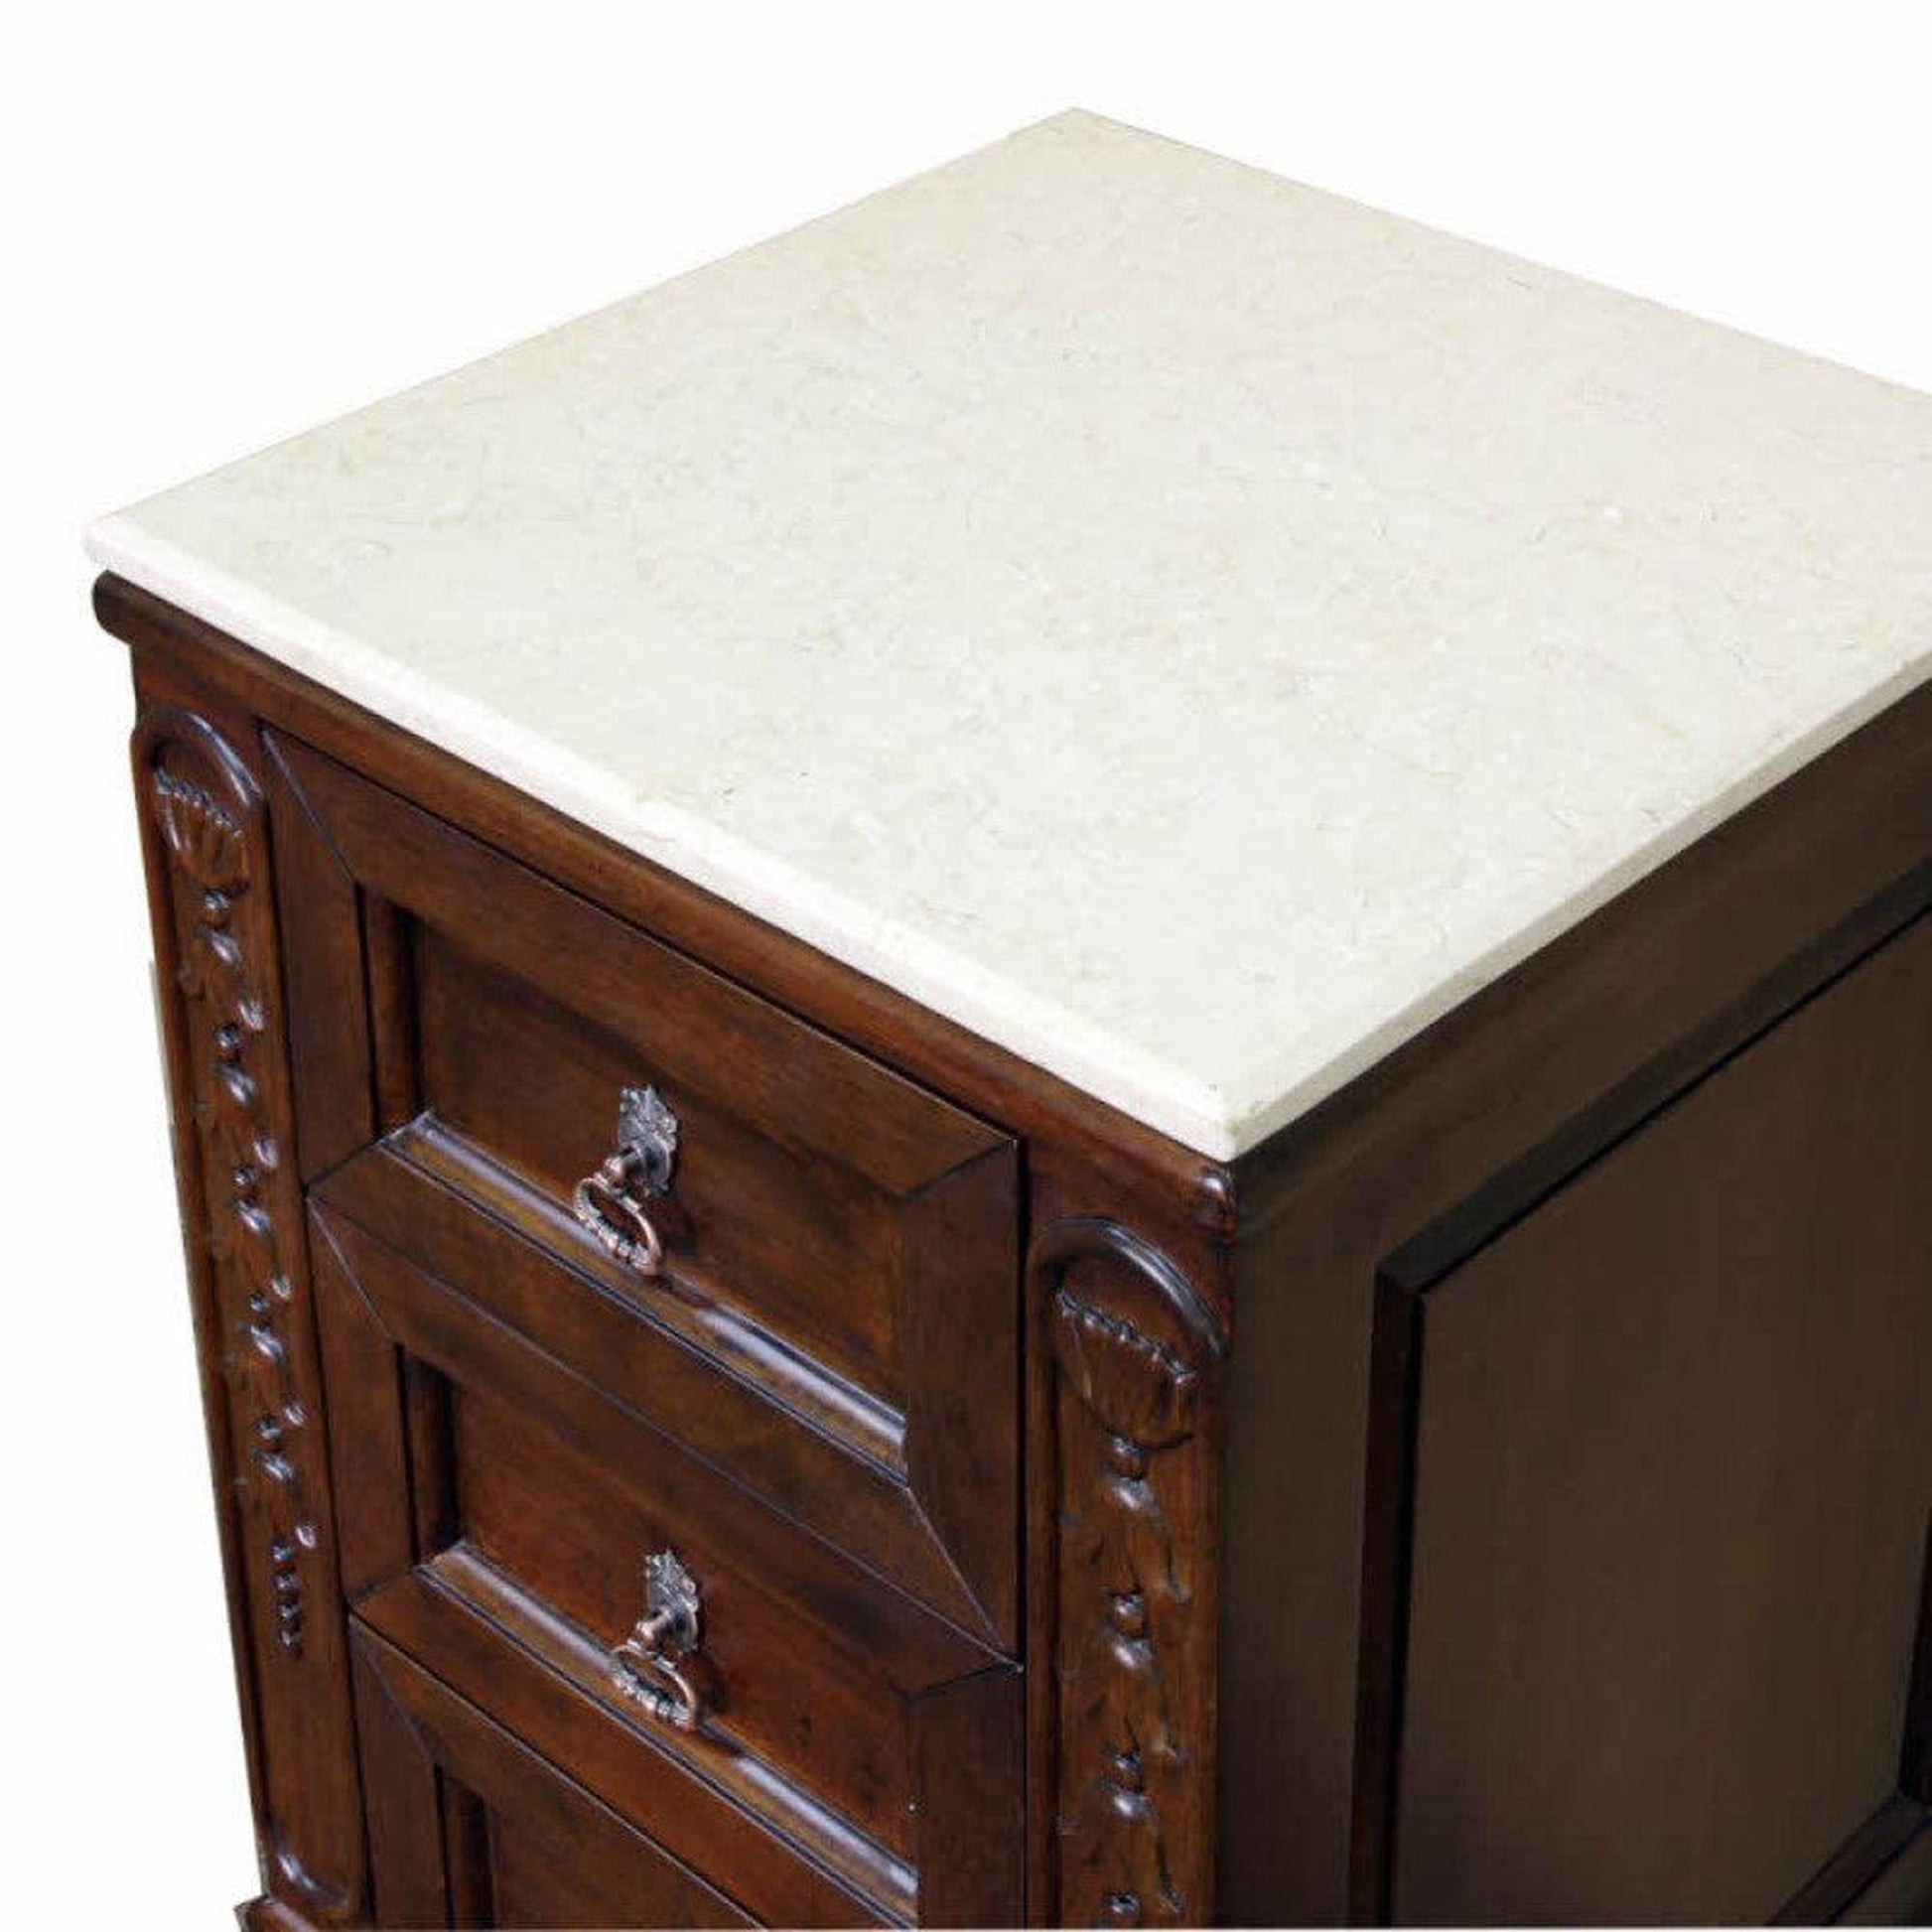 Bellaterra Home 18" 3-Drawer Walnut Wall-Mounted Bridge Unit Cabinet With Carrara White Marble Counter Top